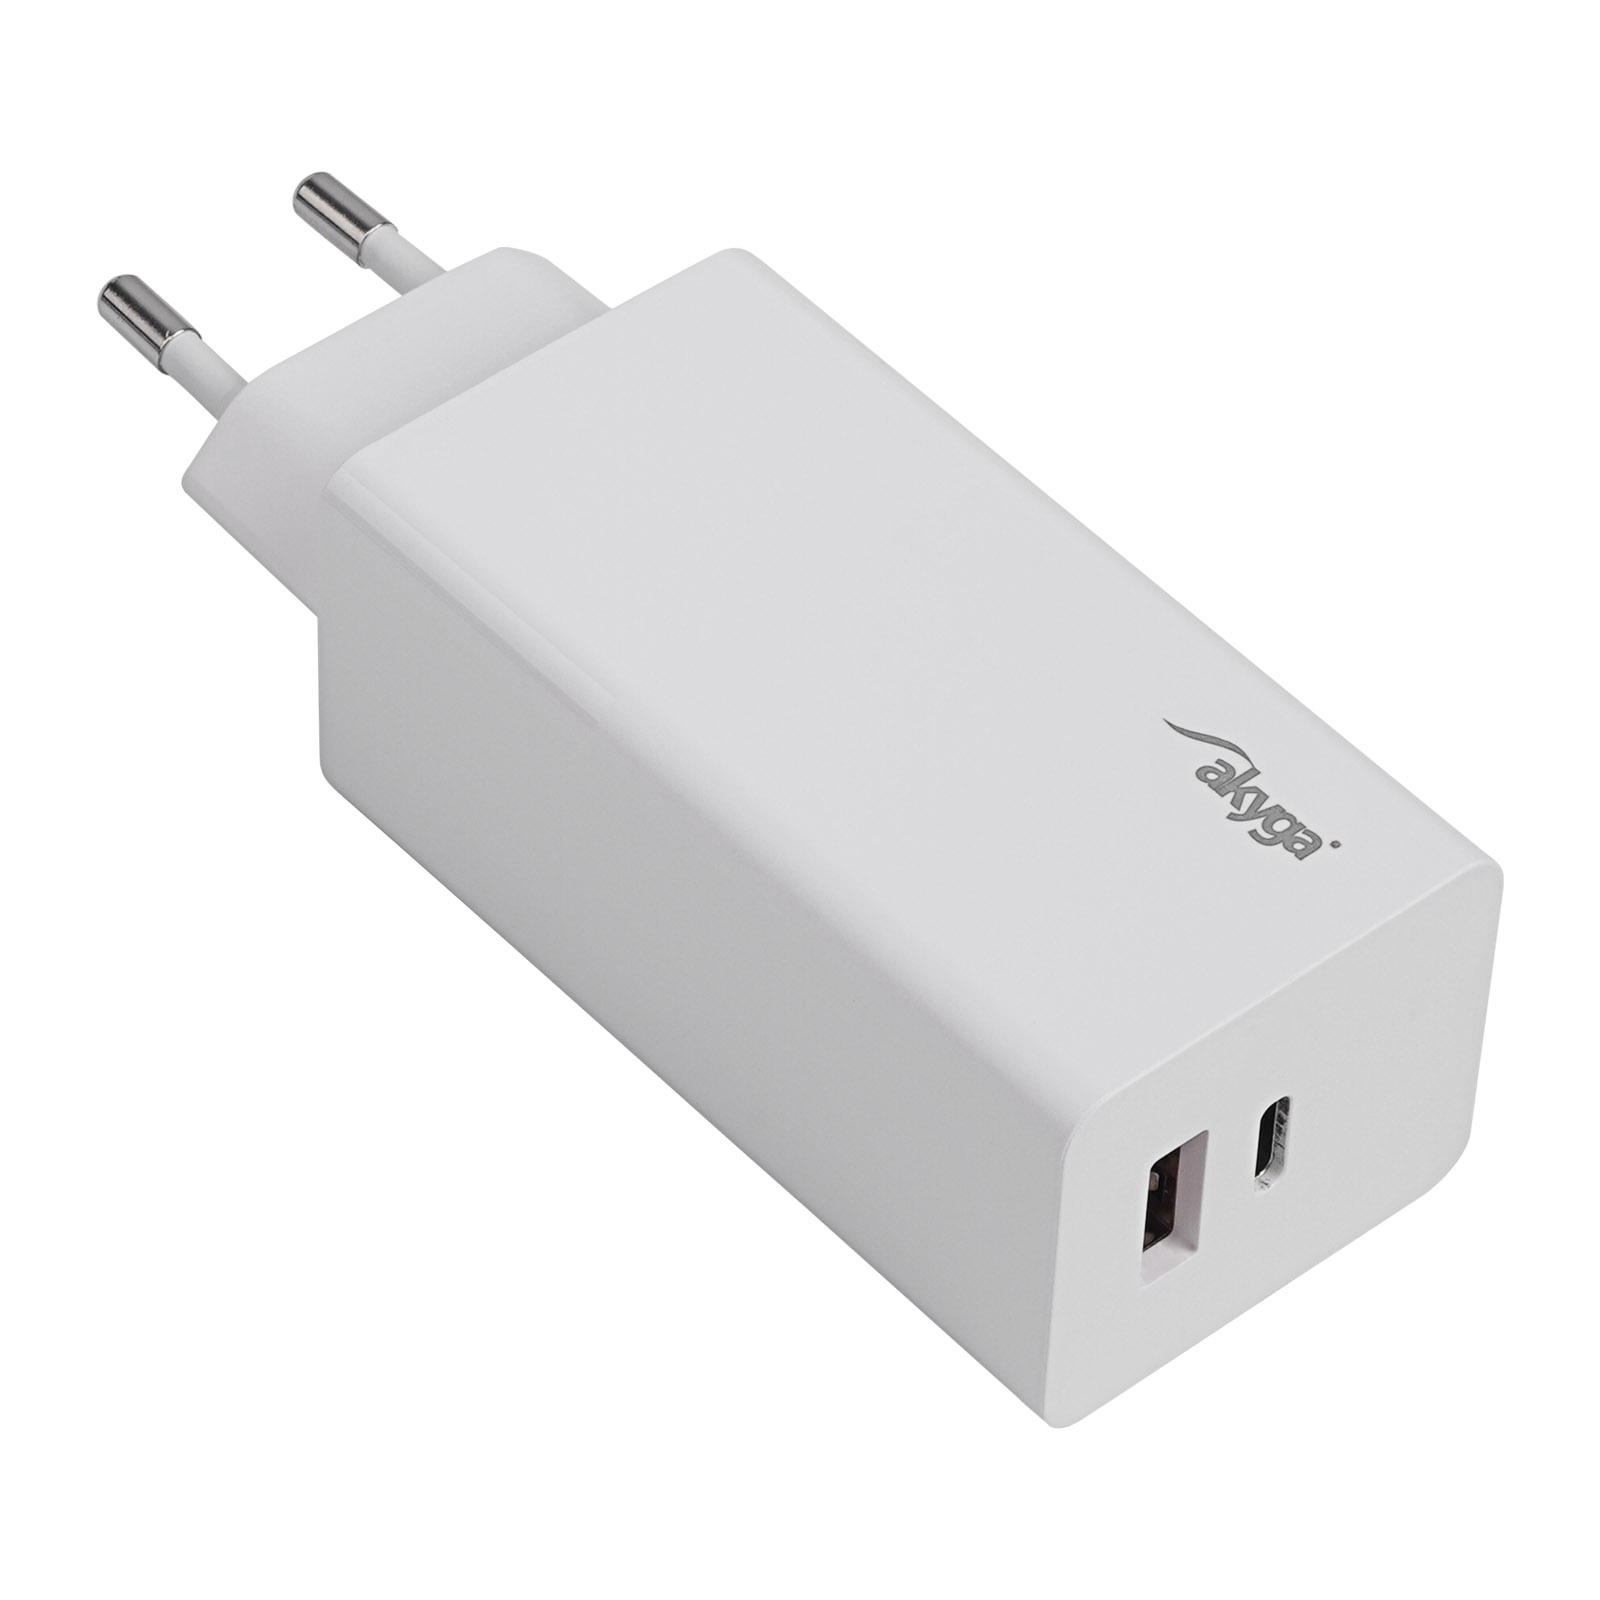 main_image Caricabatterie AK-CH-20 USB-A + USB-C PD 5-20V / max. 5A 100W Quick Charge 3.0 GaN